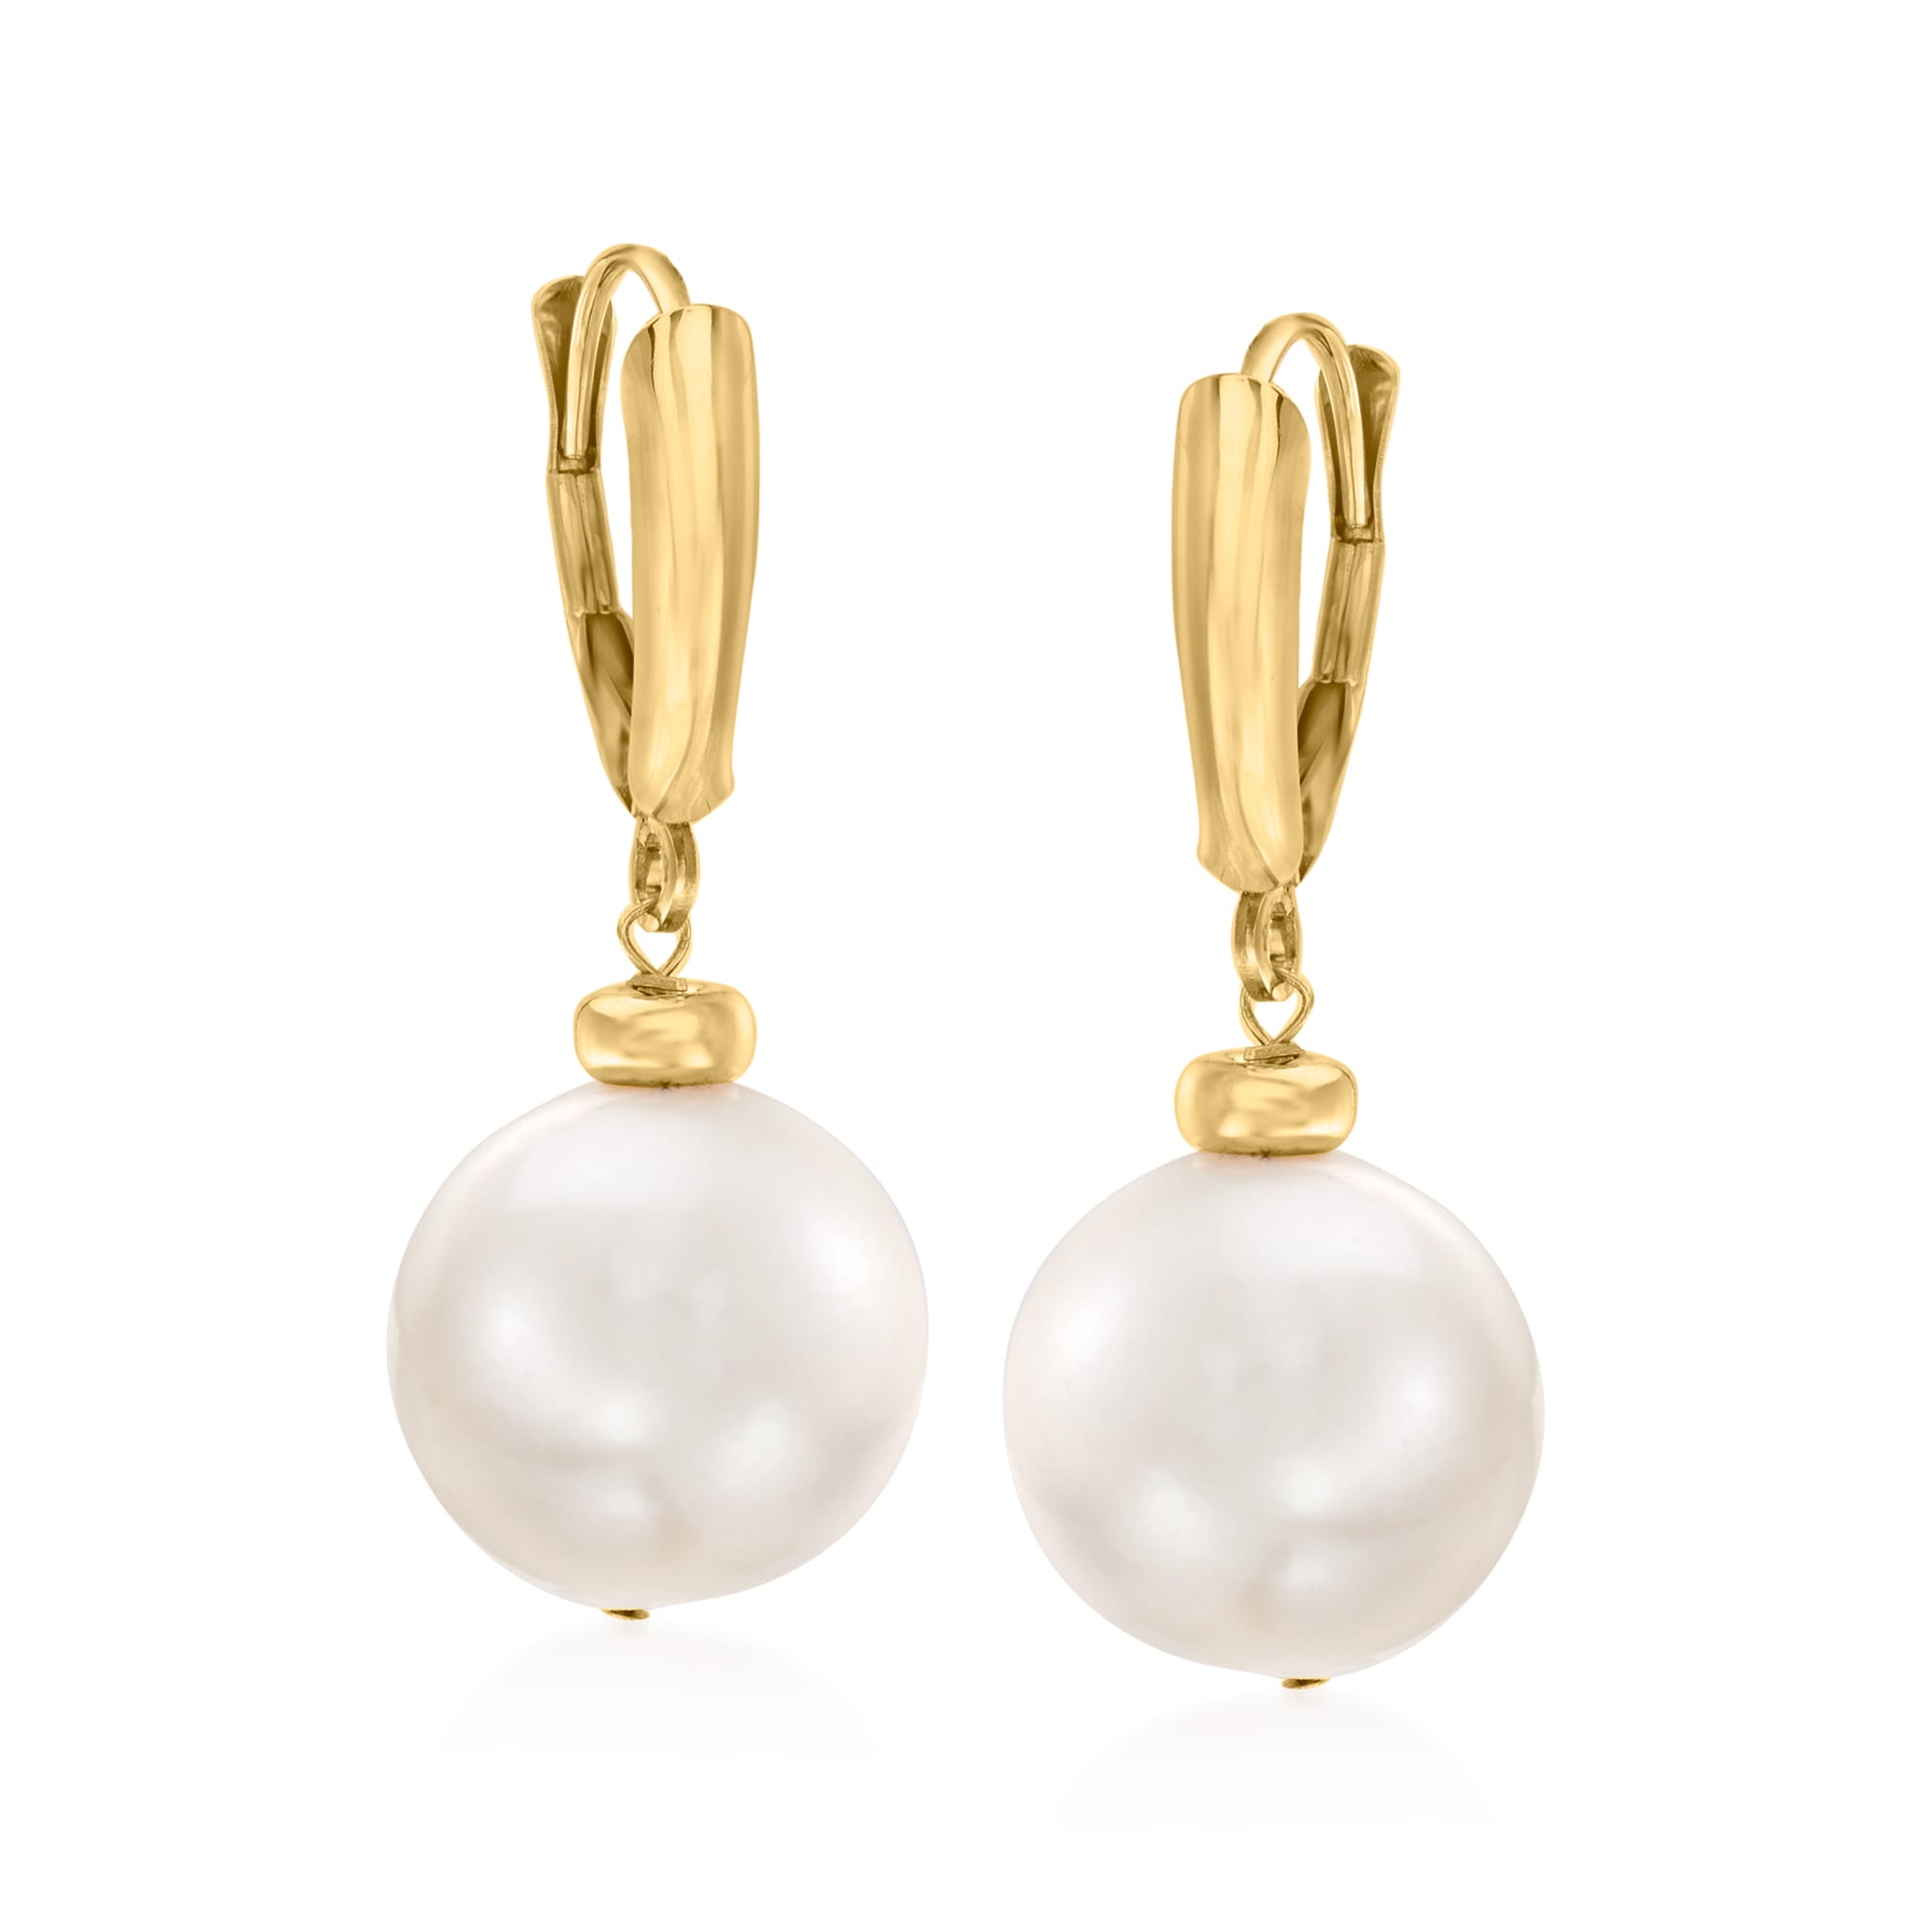 11.5-12.5mm Cultured Pearl Drop Earrings in 14kt Yellow Gold | Ross-Simons